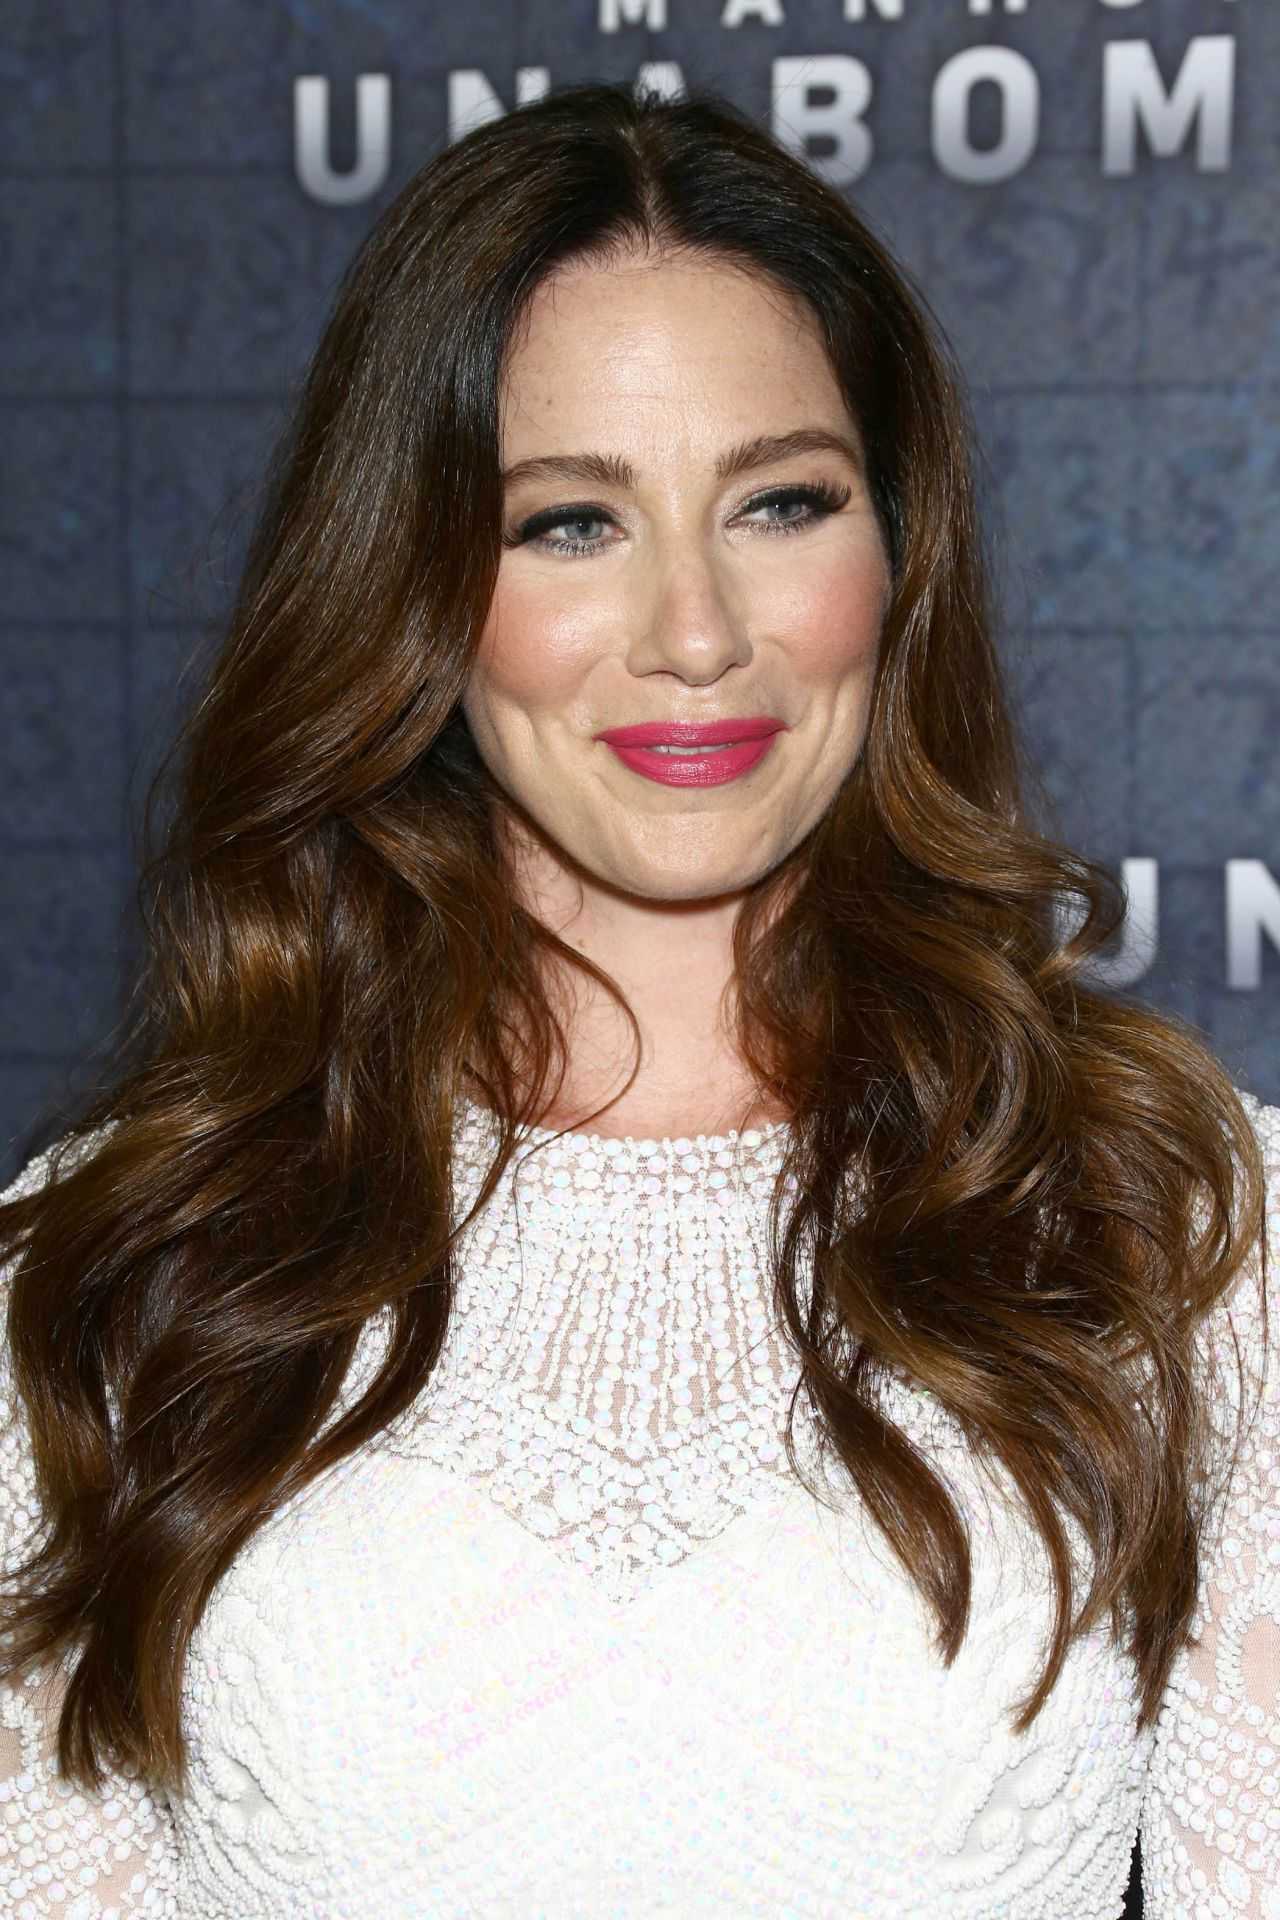 70+ Hot Pictures Of Lynn Collins Expose Her Smokin Hot Body 11